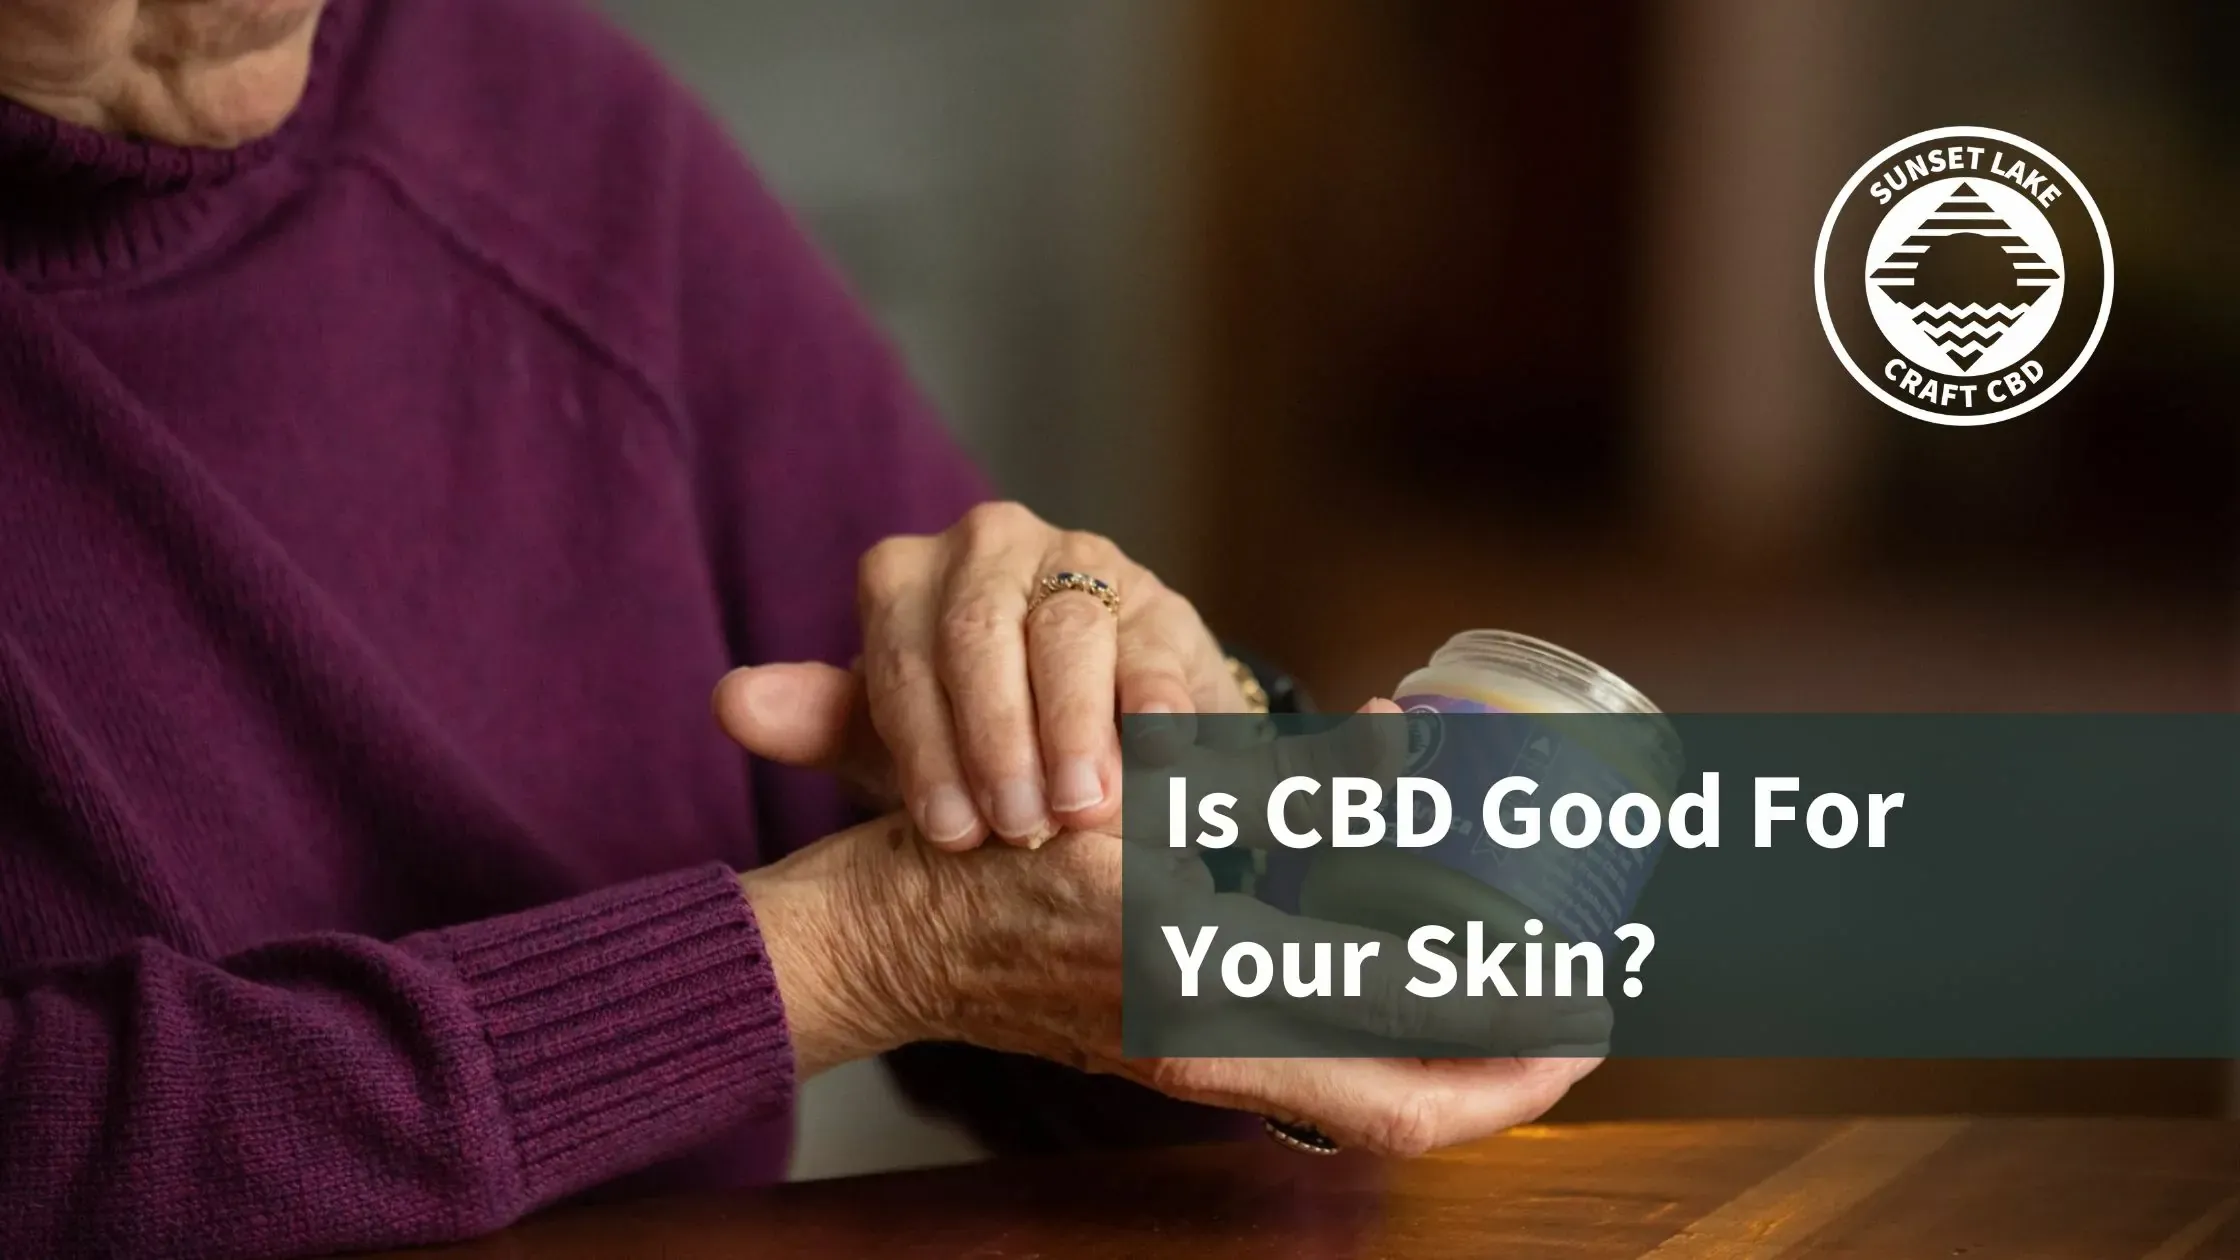 Woman rubbing CBD salve on her wrist. Text reads "Is CBD Good For Your Skin?"